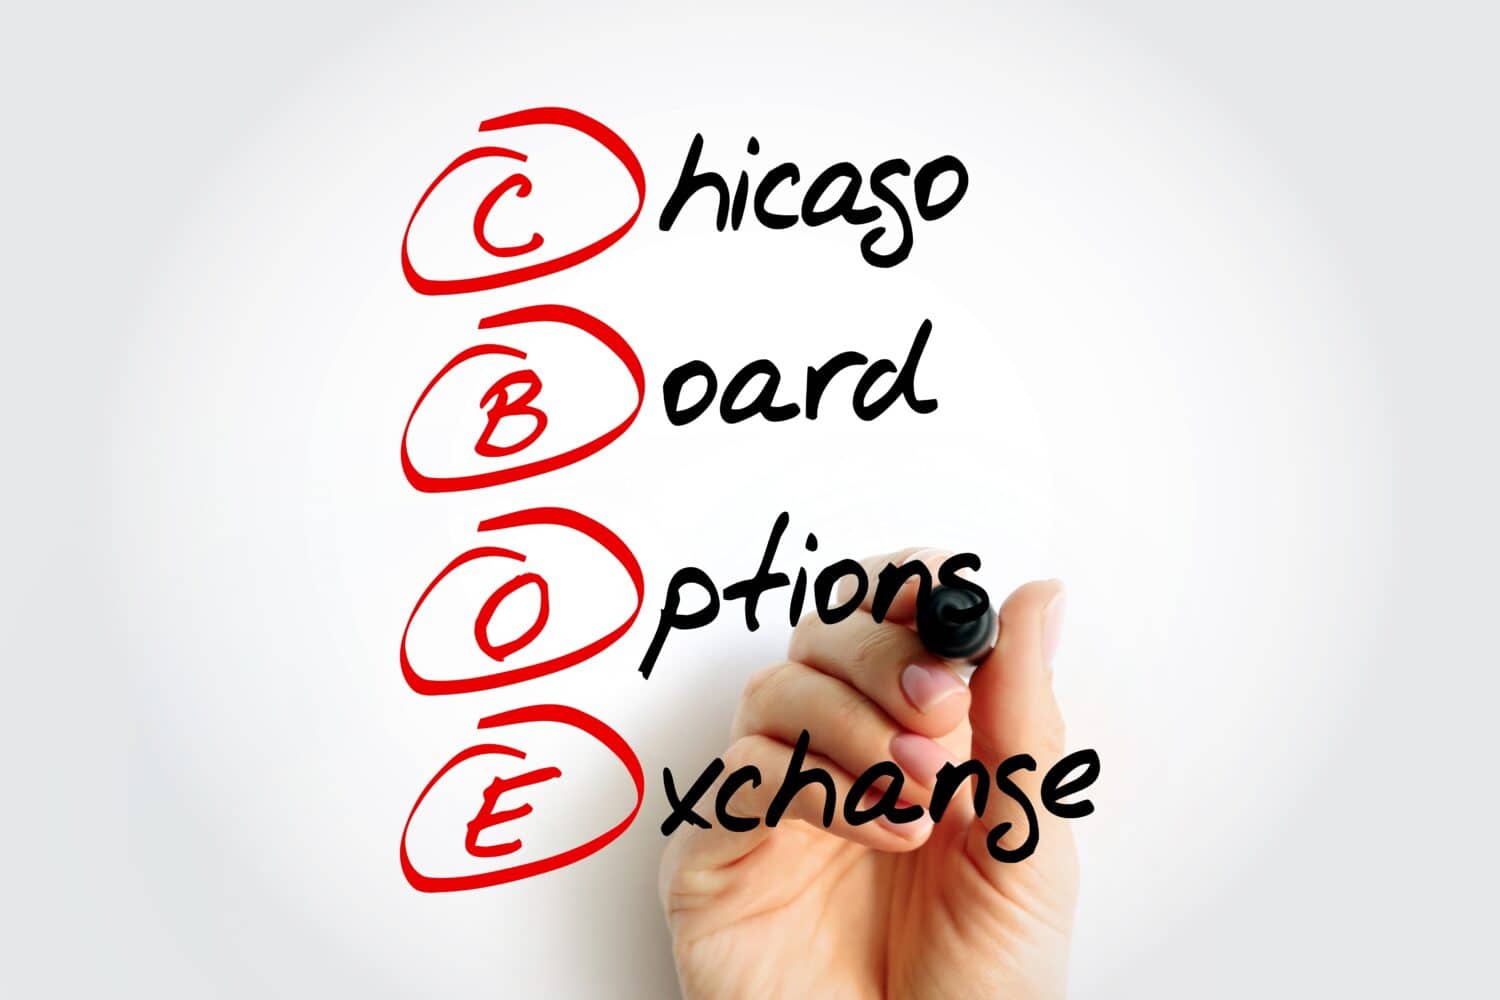 CBOE - Chicago Board Options Exchange acronym with marker, business concept background